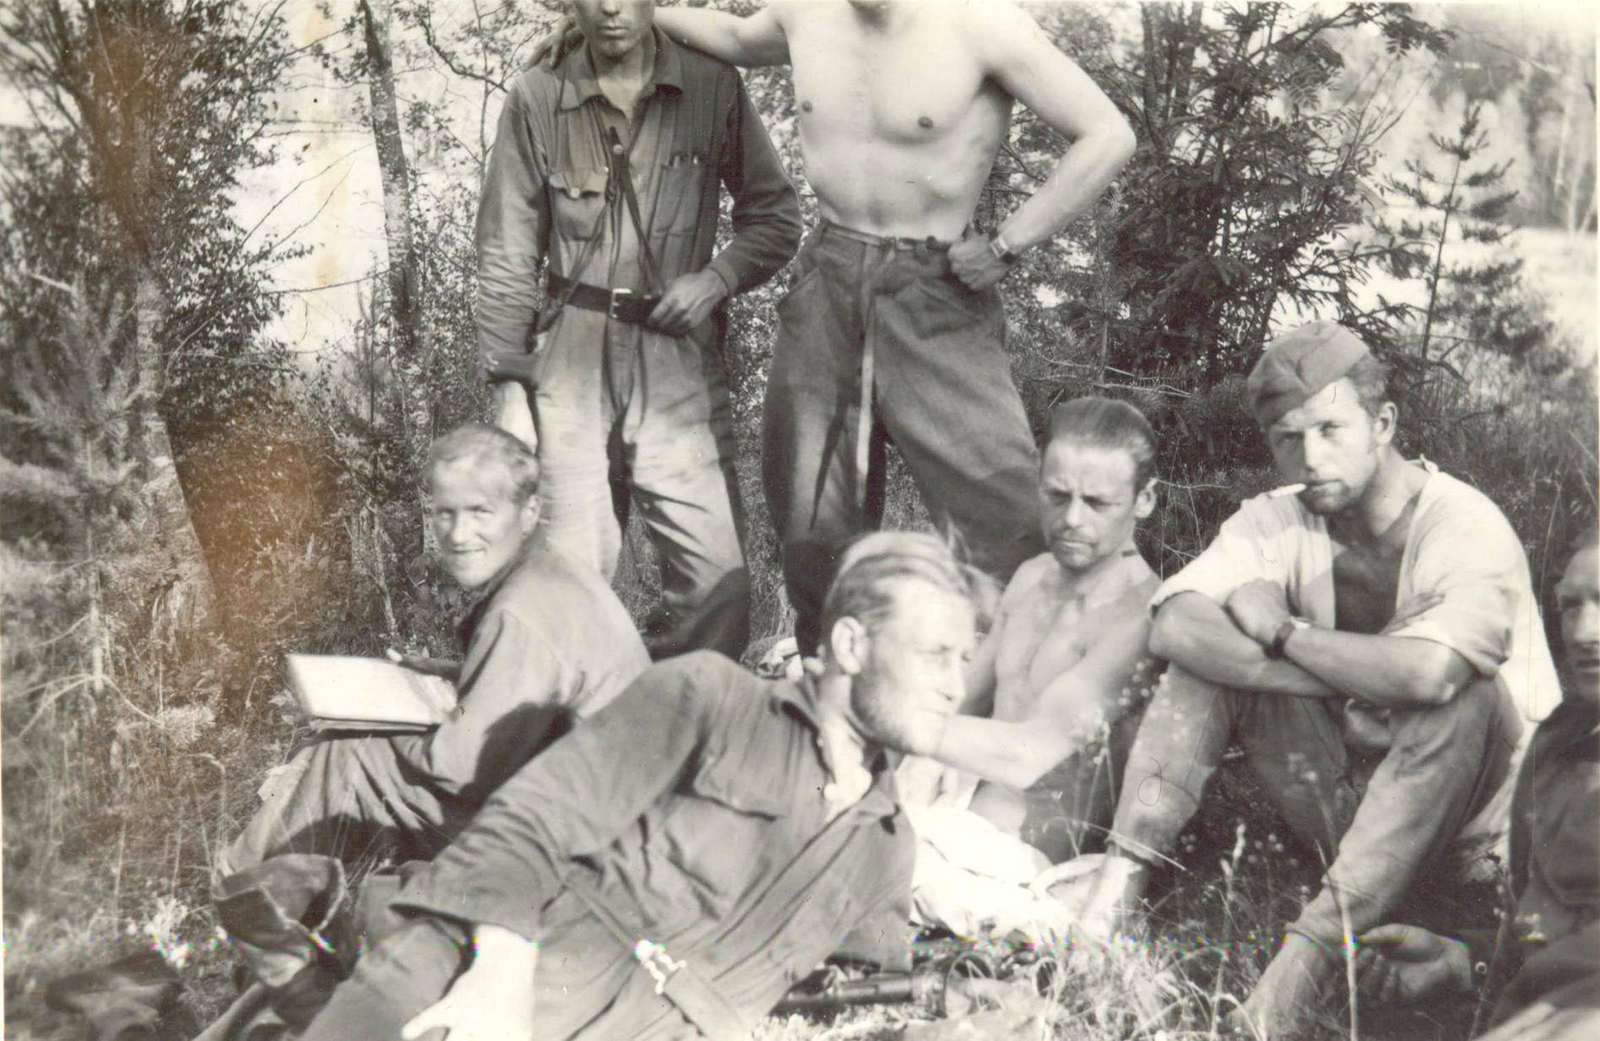 July 13, 1941. Tolvanen group is waiting for delivery of supplies by plane. Sitting: Juho Honkanen, Arvo Pikkanen, Antti Porvali, Eugen Wist and Mauri Kärpänen; standing: Muisto Lassila and Toivo Paavilainen